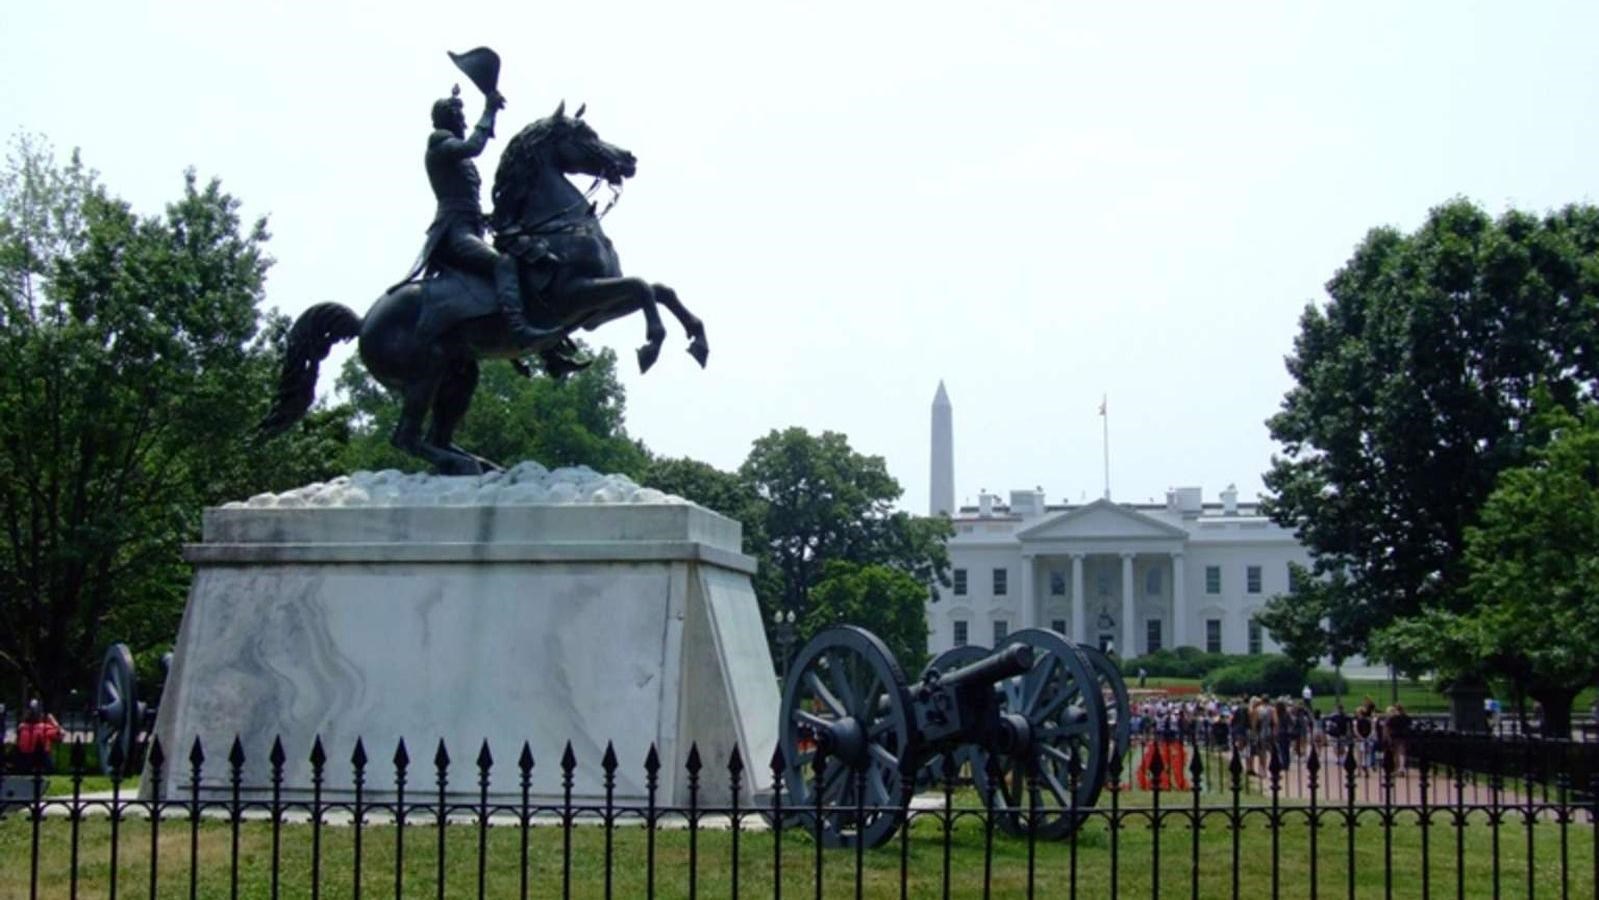 A statue of General Andrew Jackson on a galloping horse waving hat in the air. A canon is nearby.